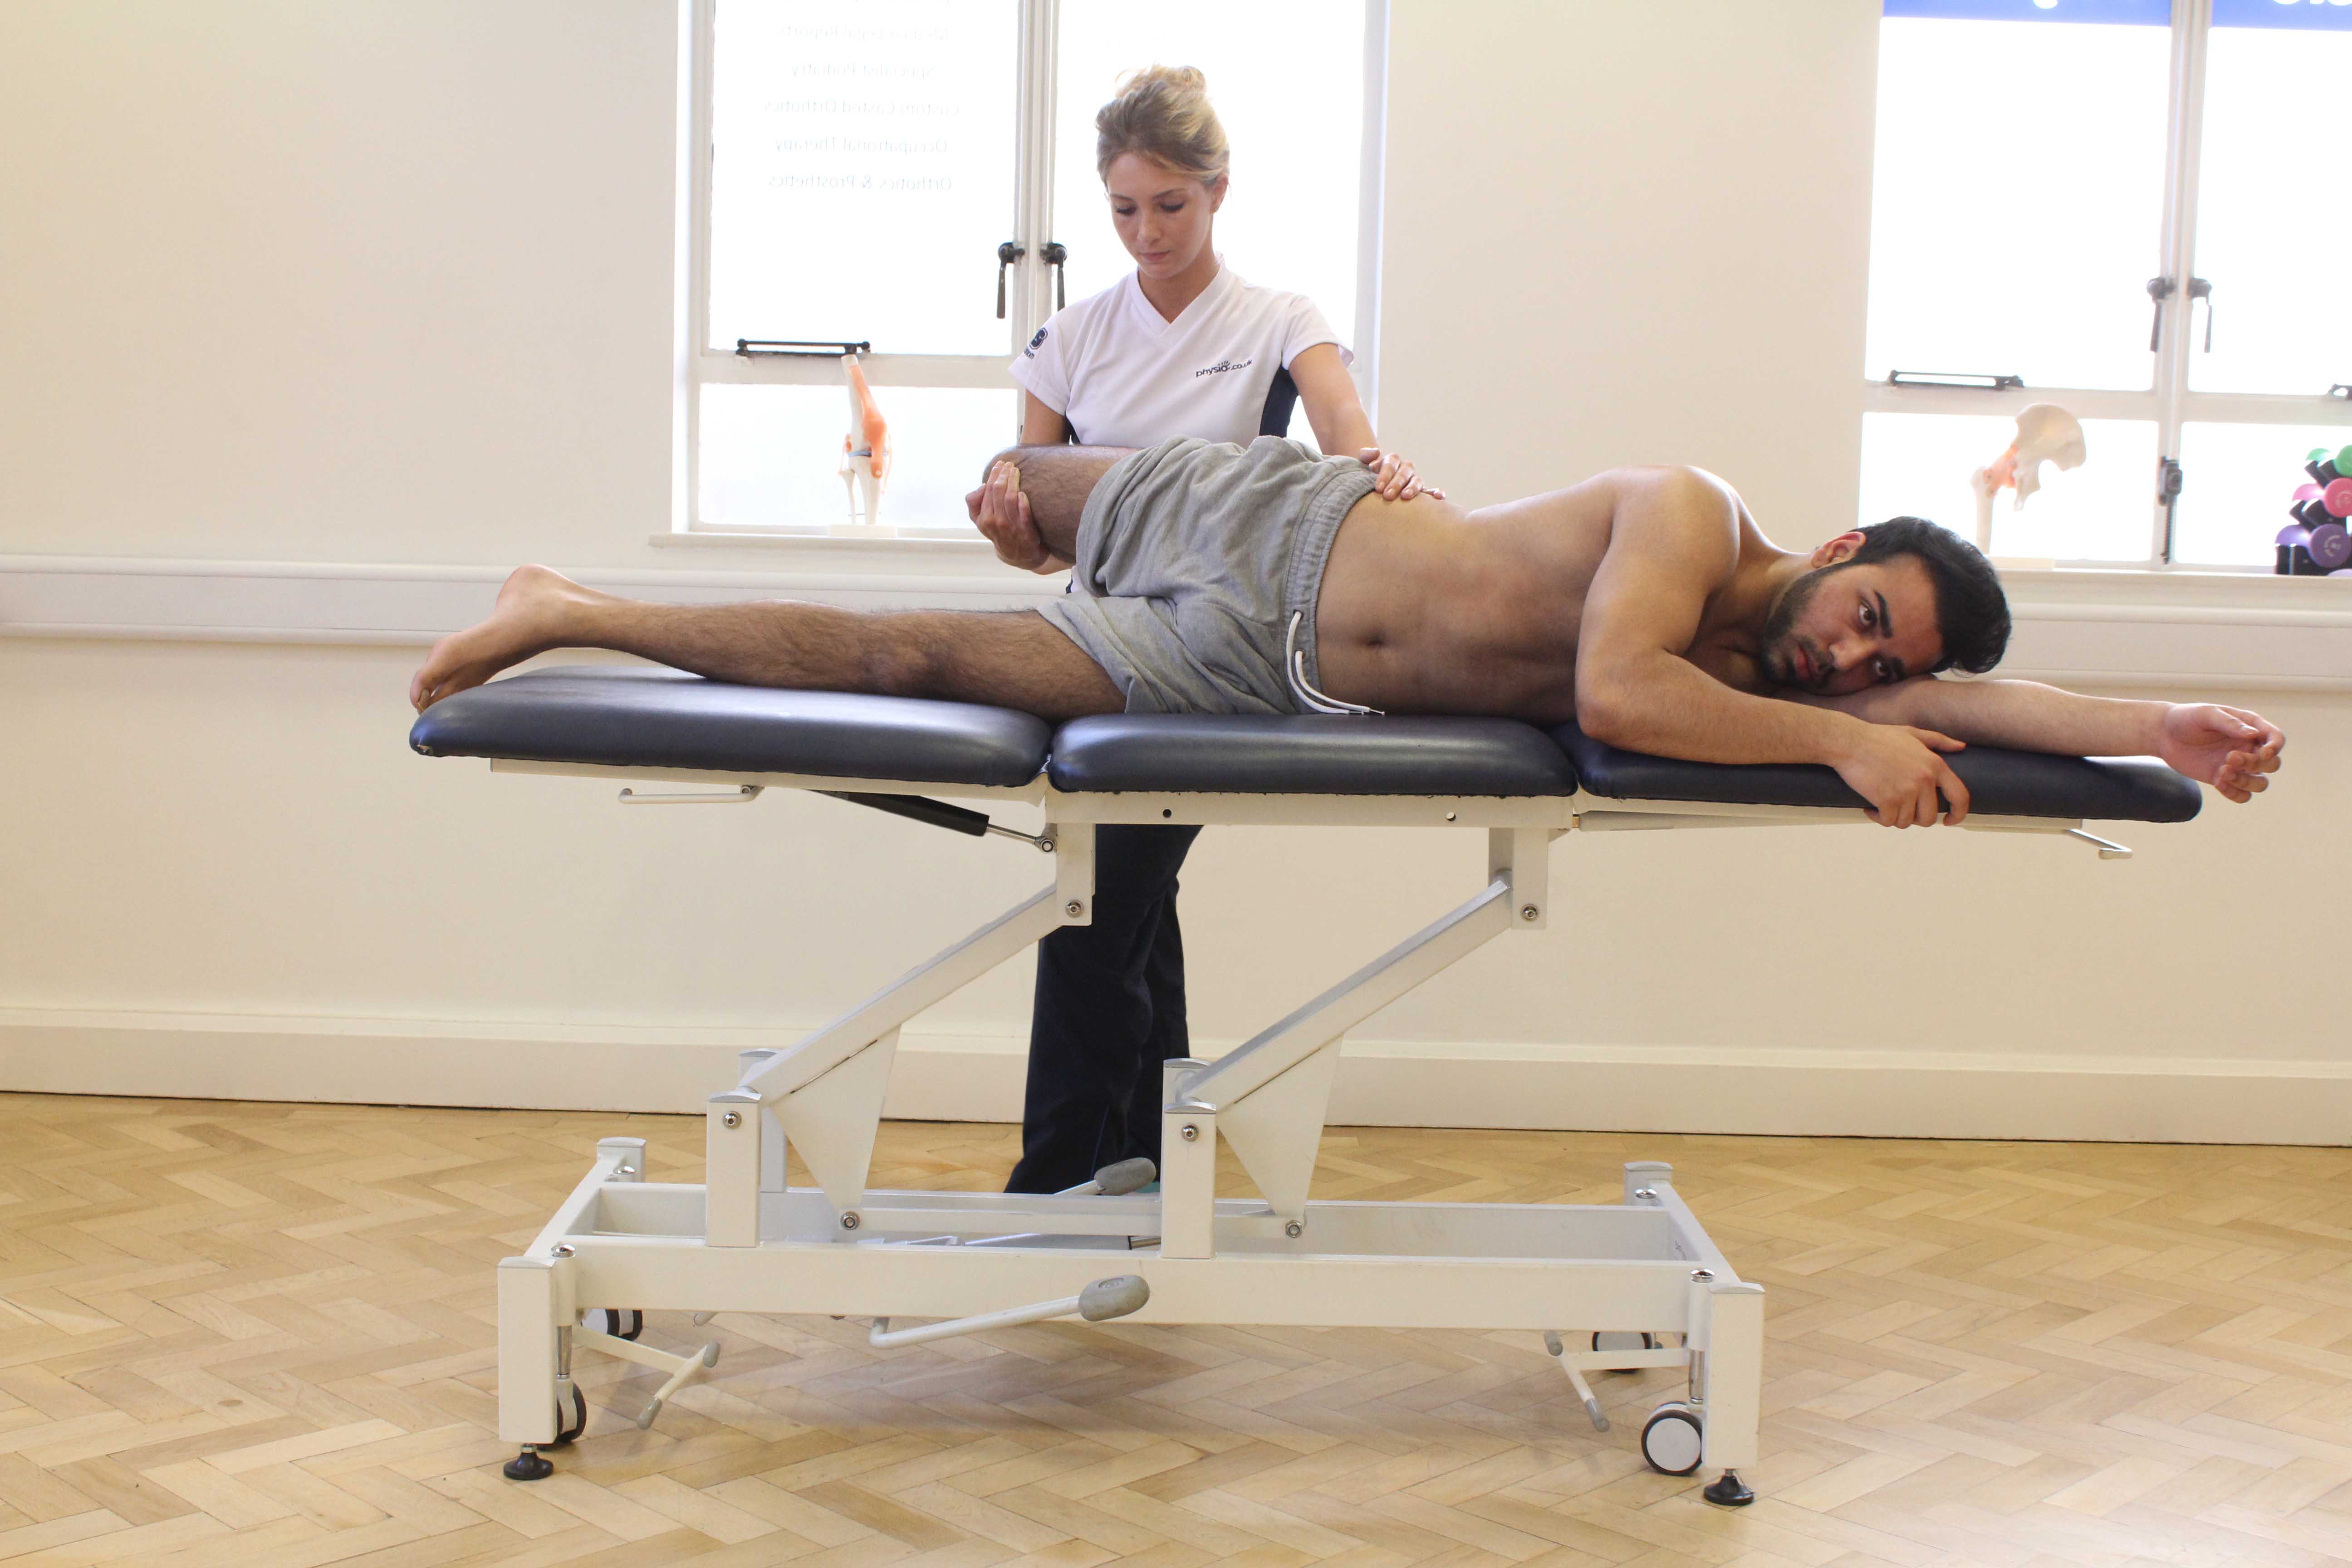 Soft tissue massage of the upper back and shoulder by a physiotherapist